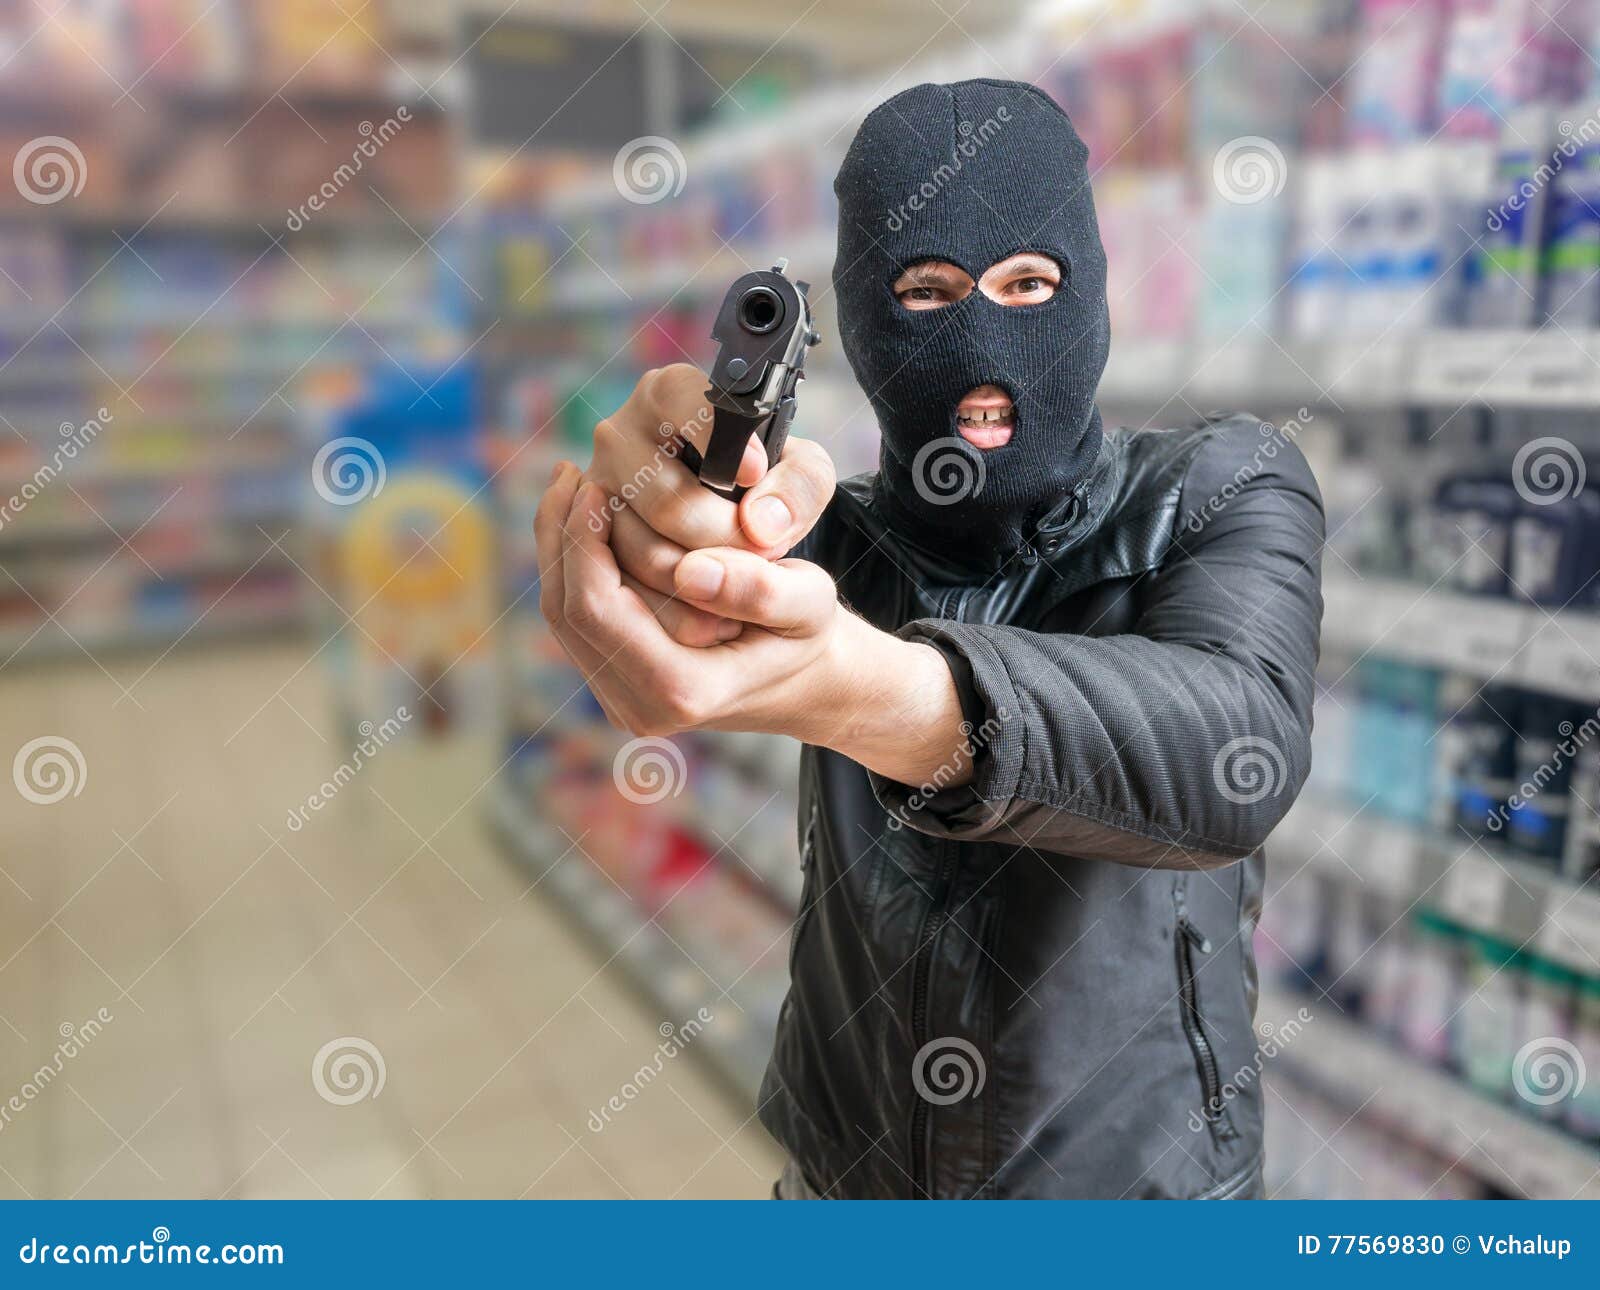 robbery in store. robber is aiming and threatening with gun in shop